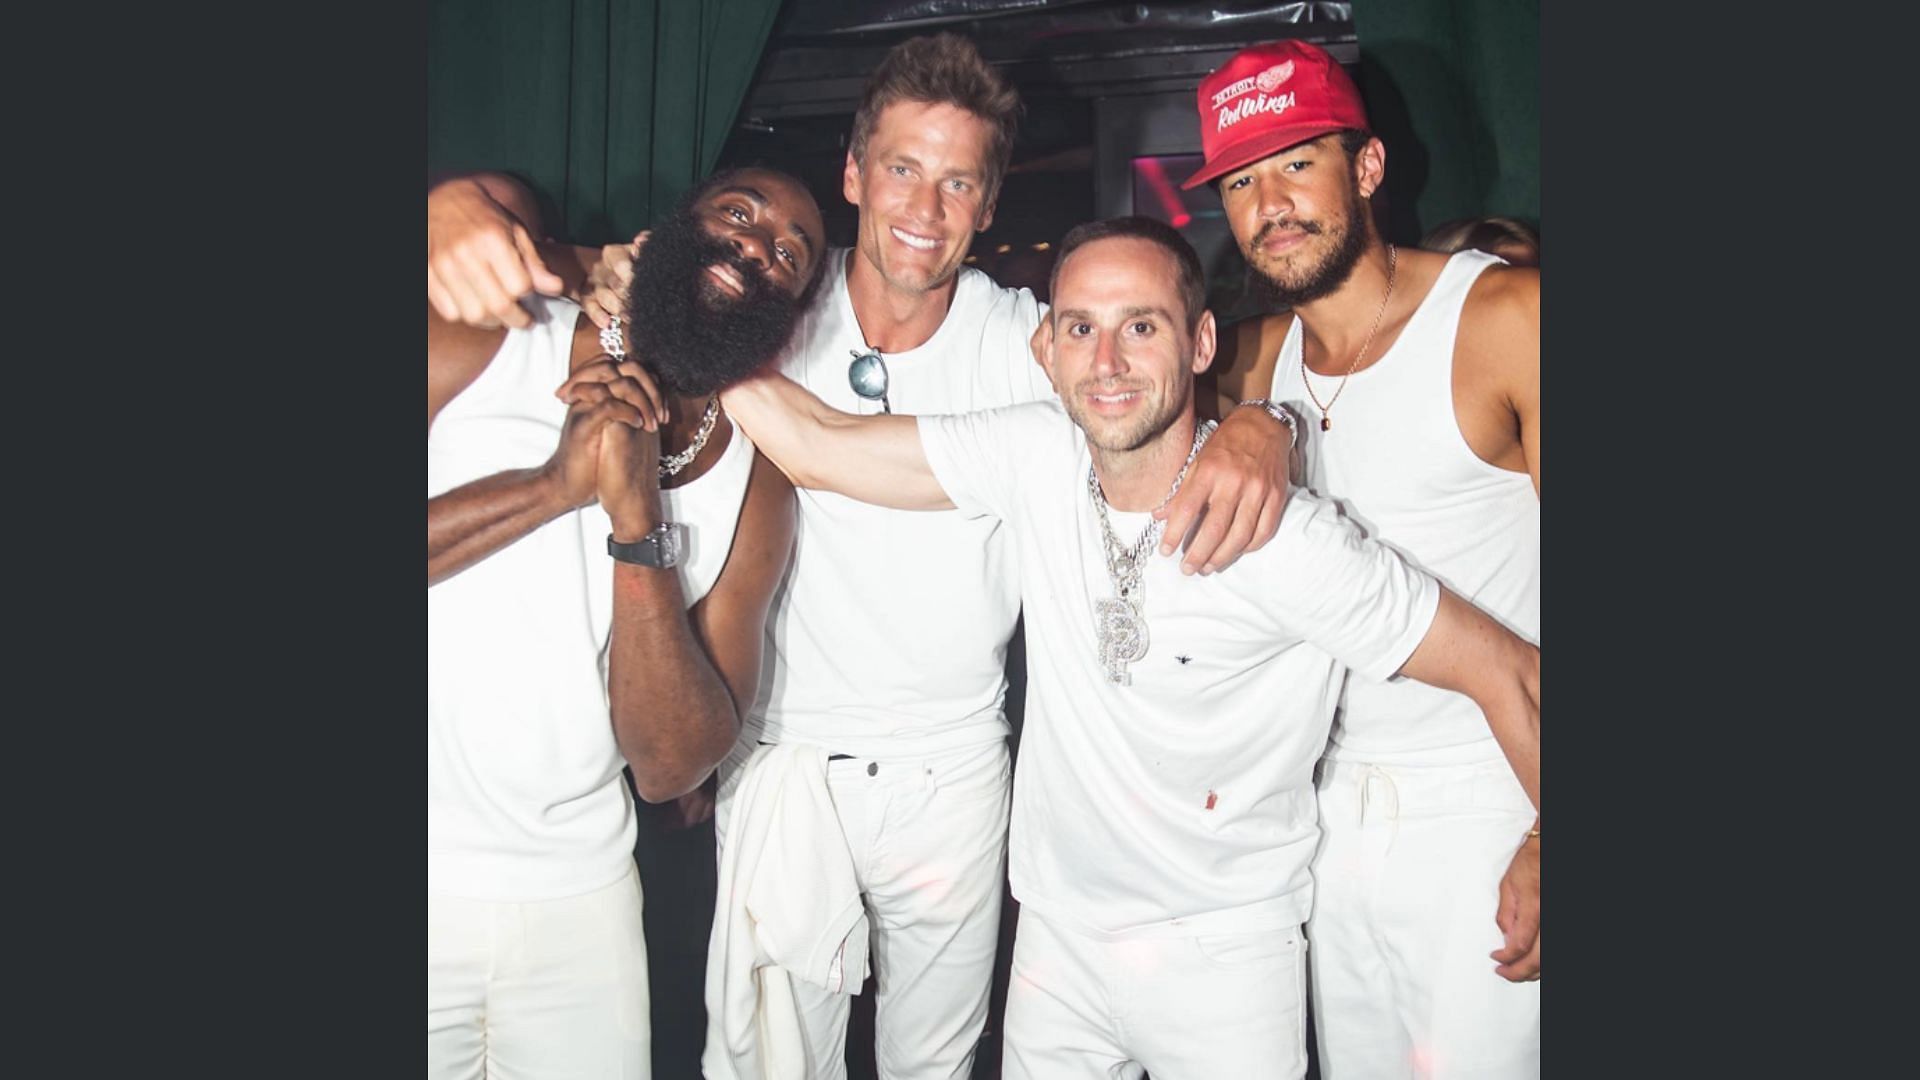 Brady hanging with NBA superstar James Harden and others. Credit: @michaelrubin (IG)